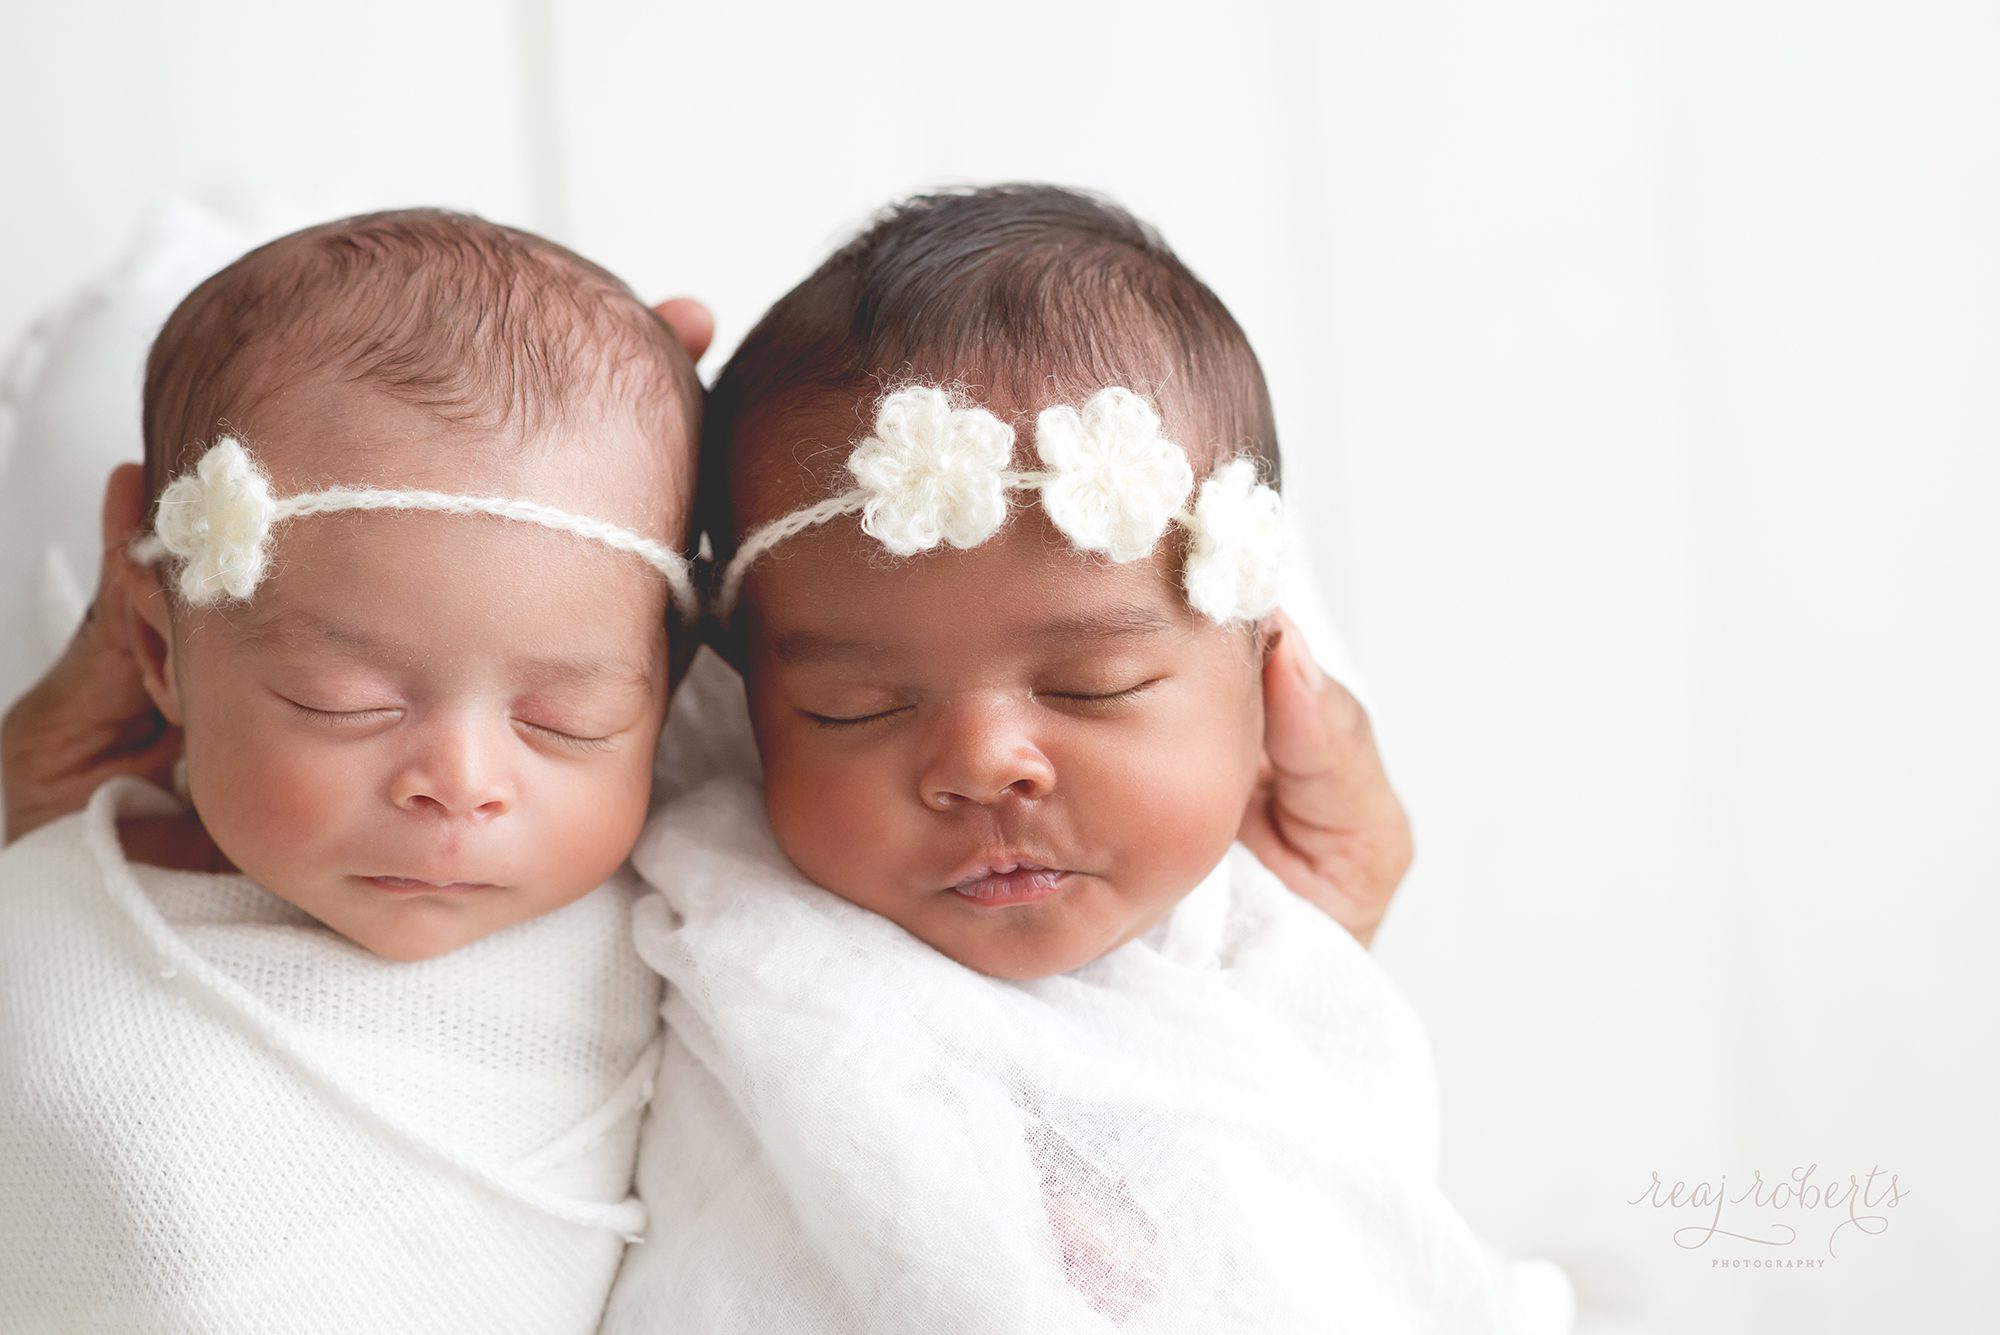 east valley multiples twins newborn photographer | Reaj Roberts Photography